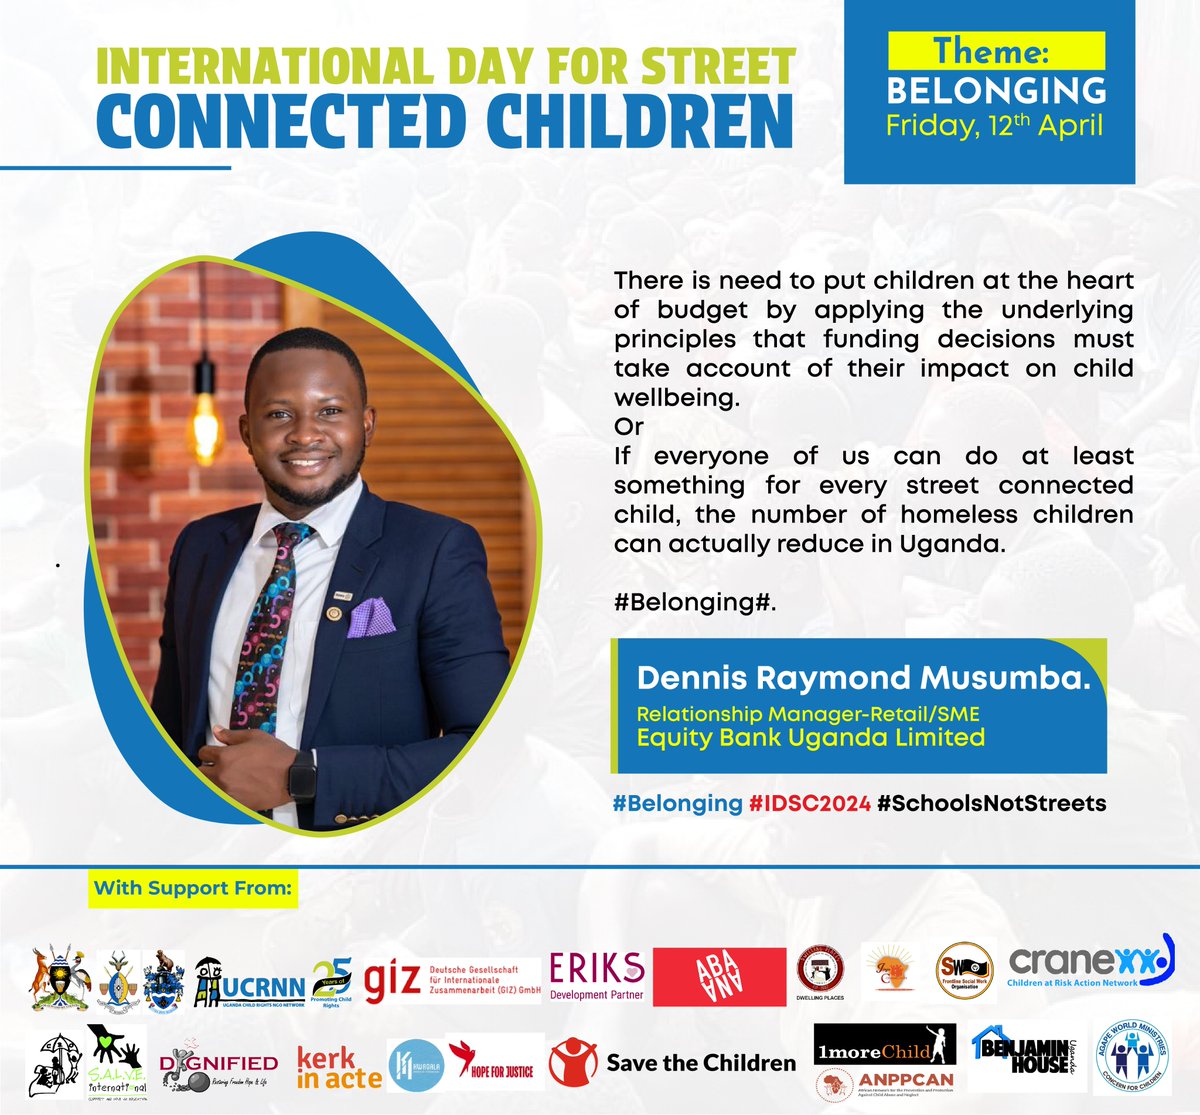 'No child should call the streets home. On this Friday 12th April Let's make sure that comes to reality.
More Messages coming from the Various Child Rights Advocates from the Different Organizations.
#Belonging #IDSC2024 #SchoolsNotStreets